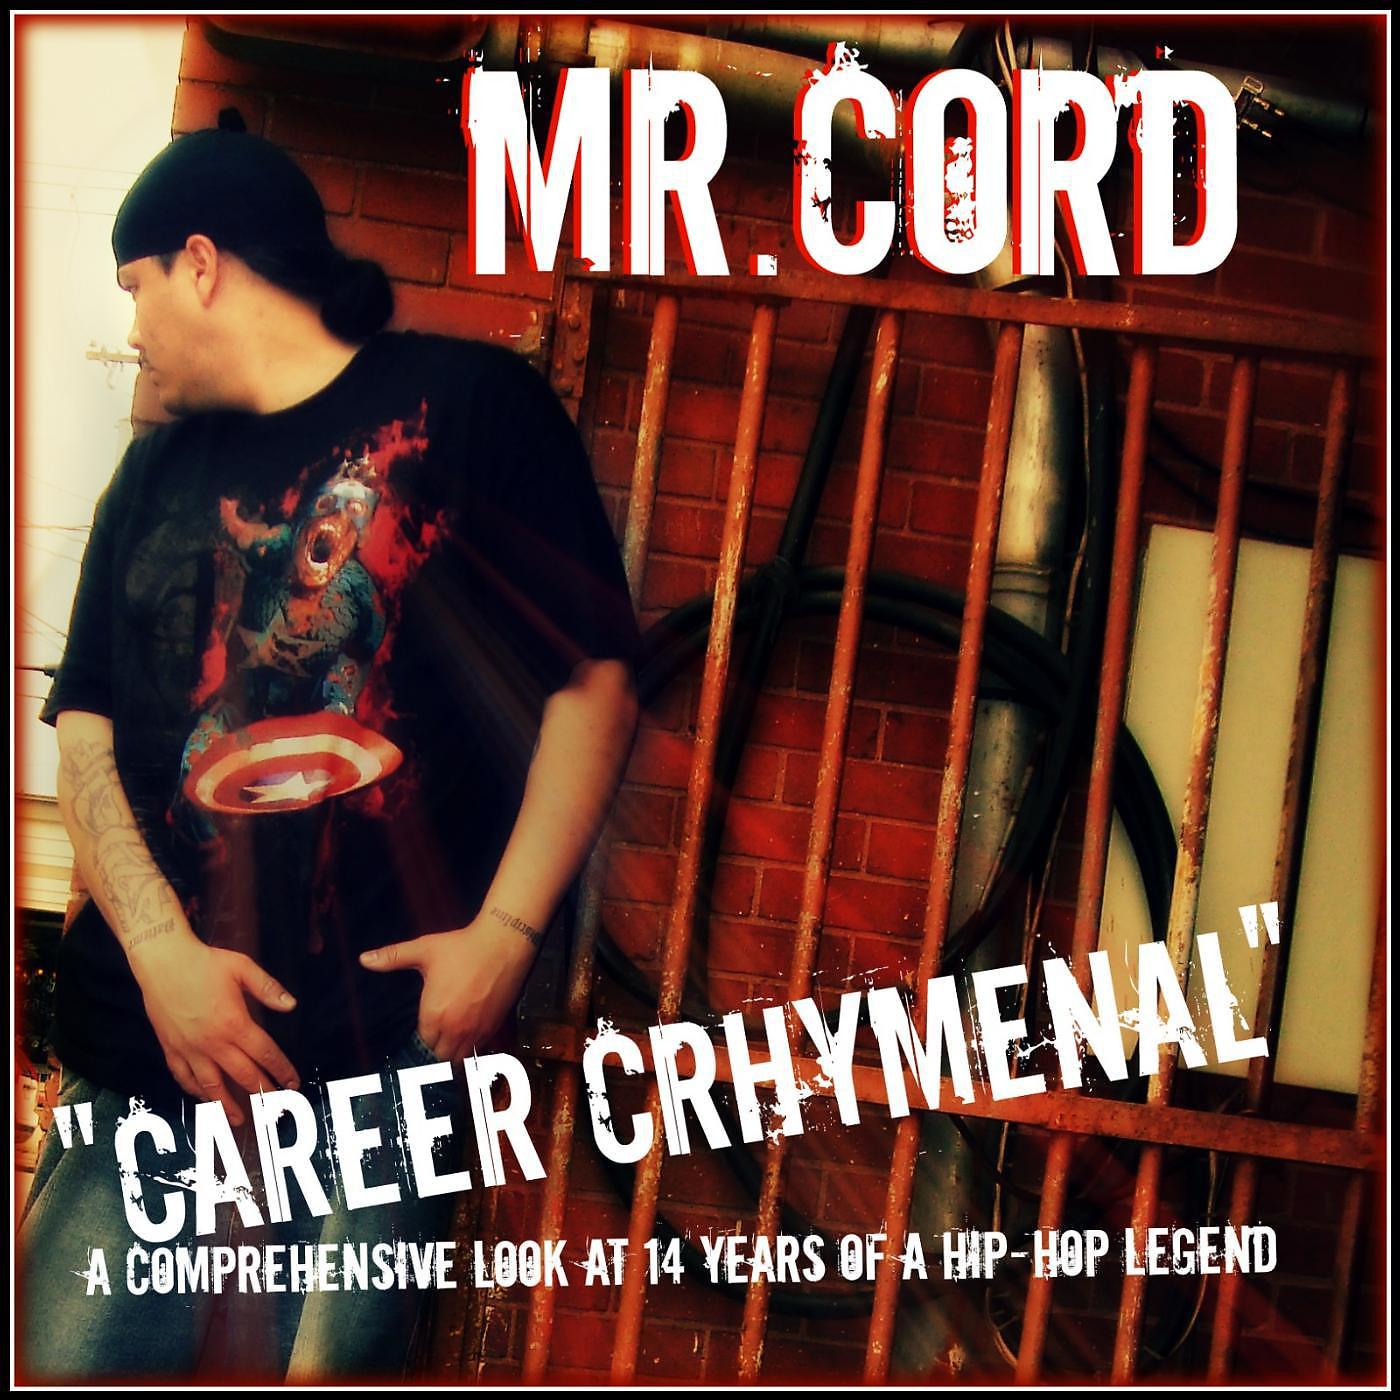 Постер альбома "Career Crhymenal" - A Comprehensive Look at 14 Years of a Hip-Hop Legend